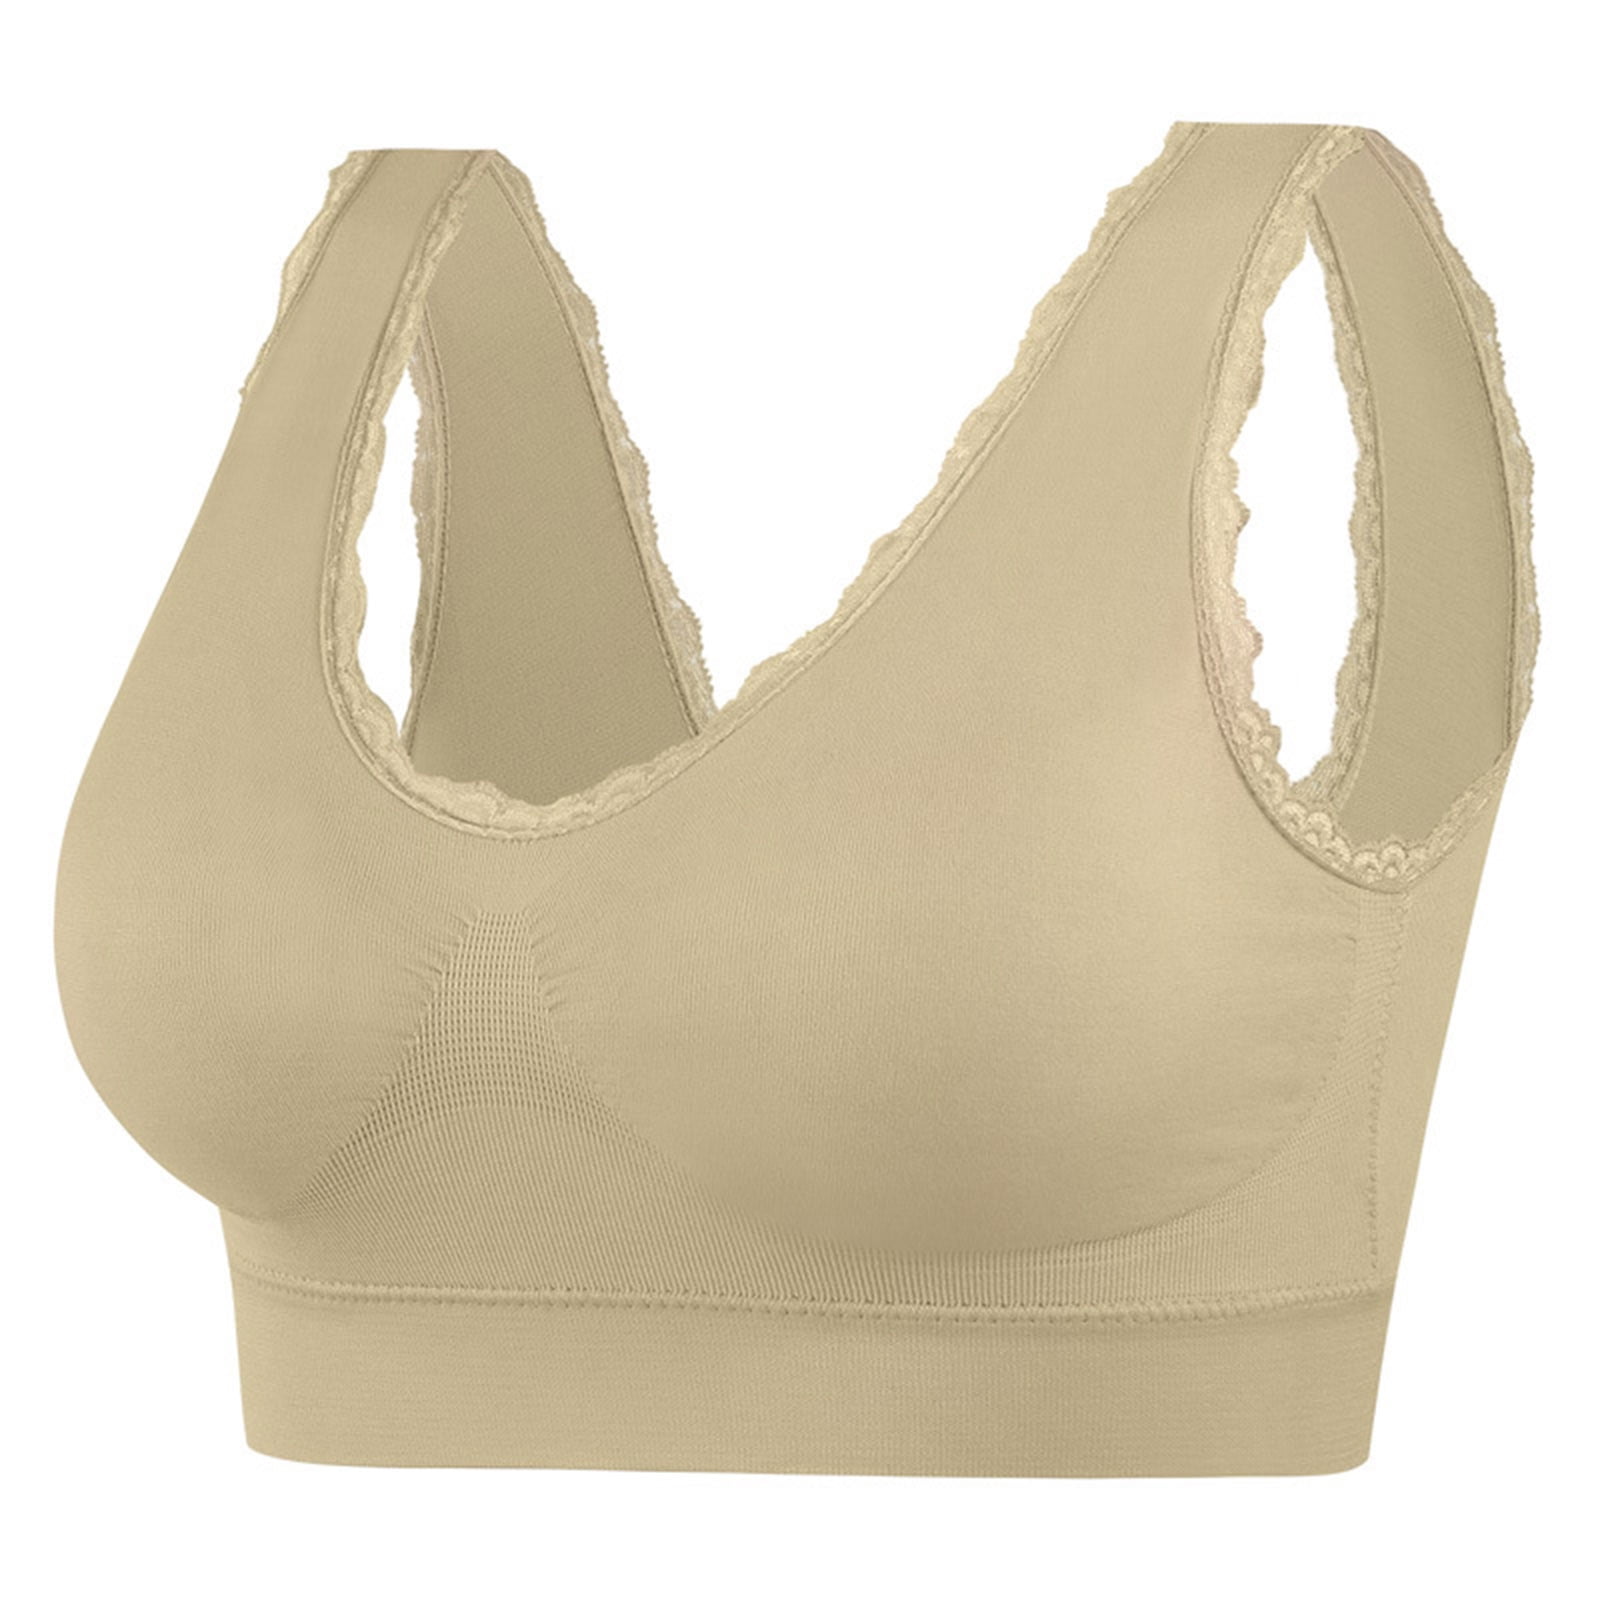 LIBRCLO Breathable Cool Liftup Air Bra, New Breathable and